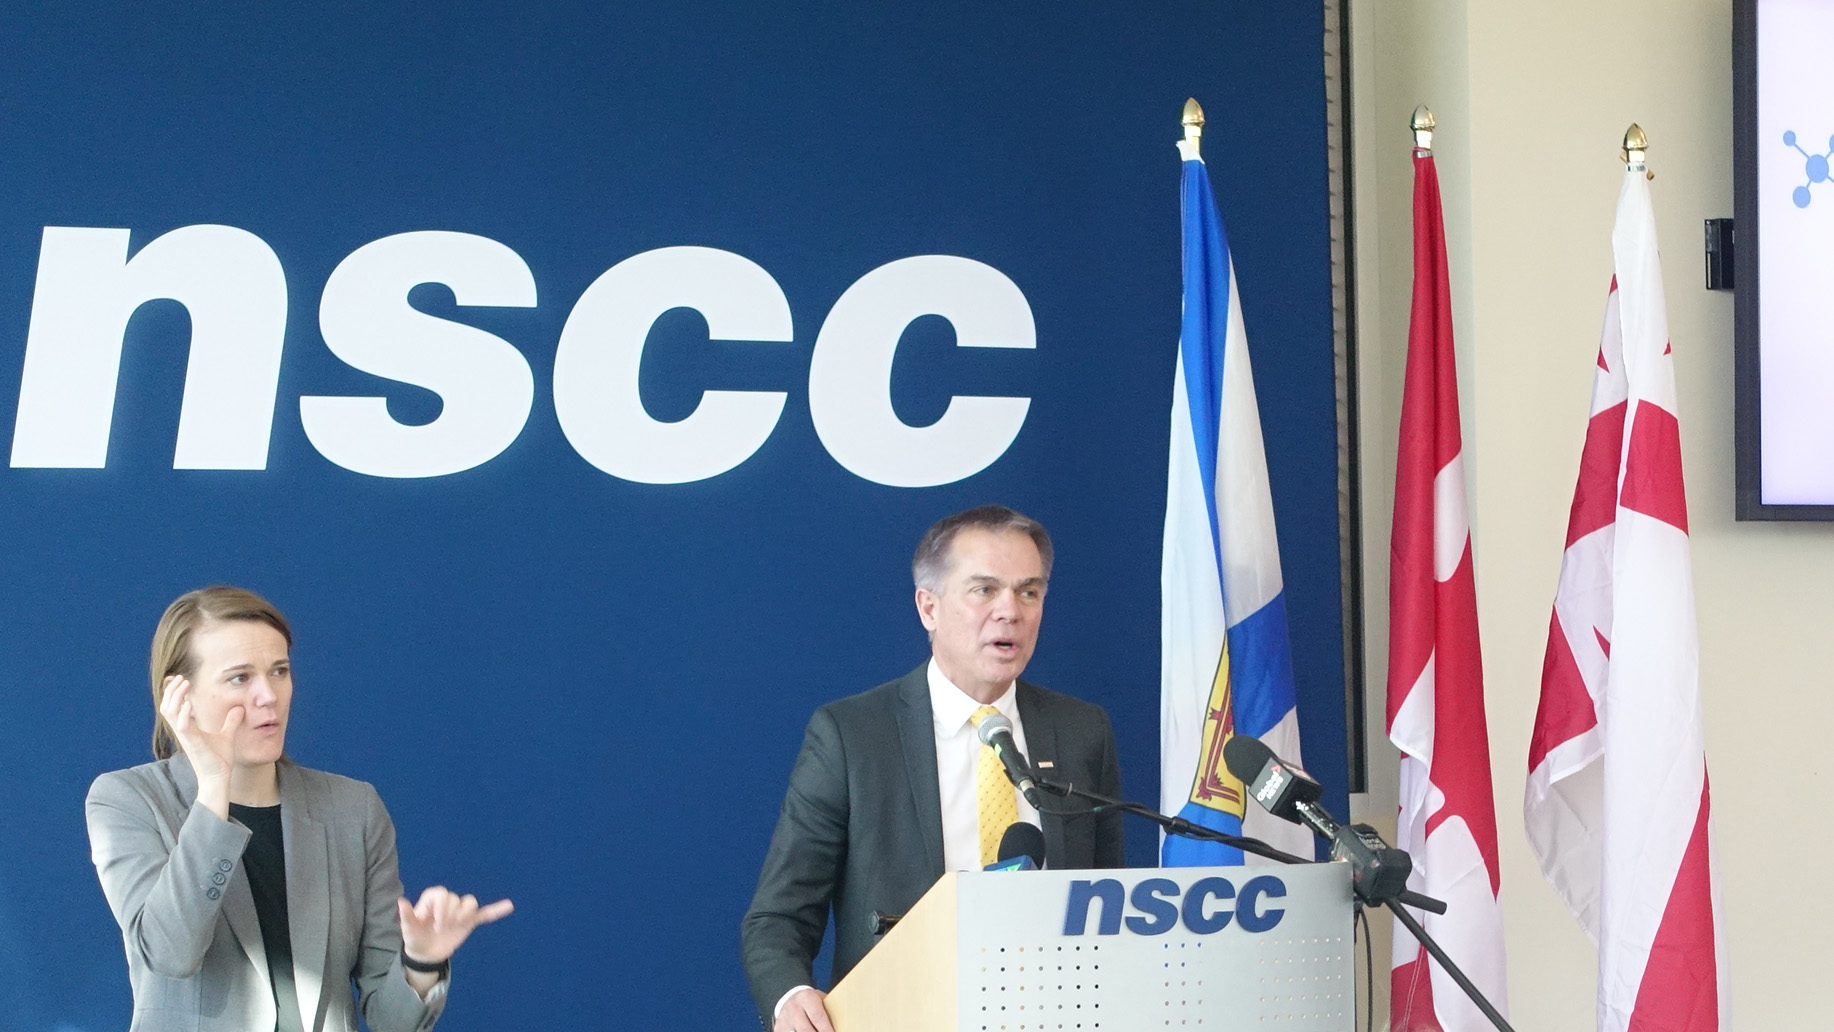 NSCC president speaking at the briefing